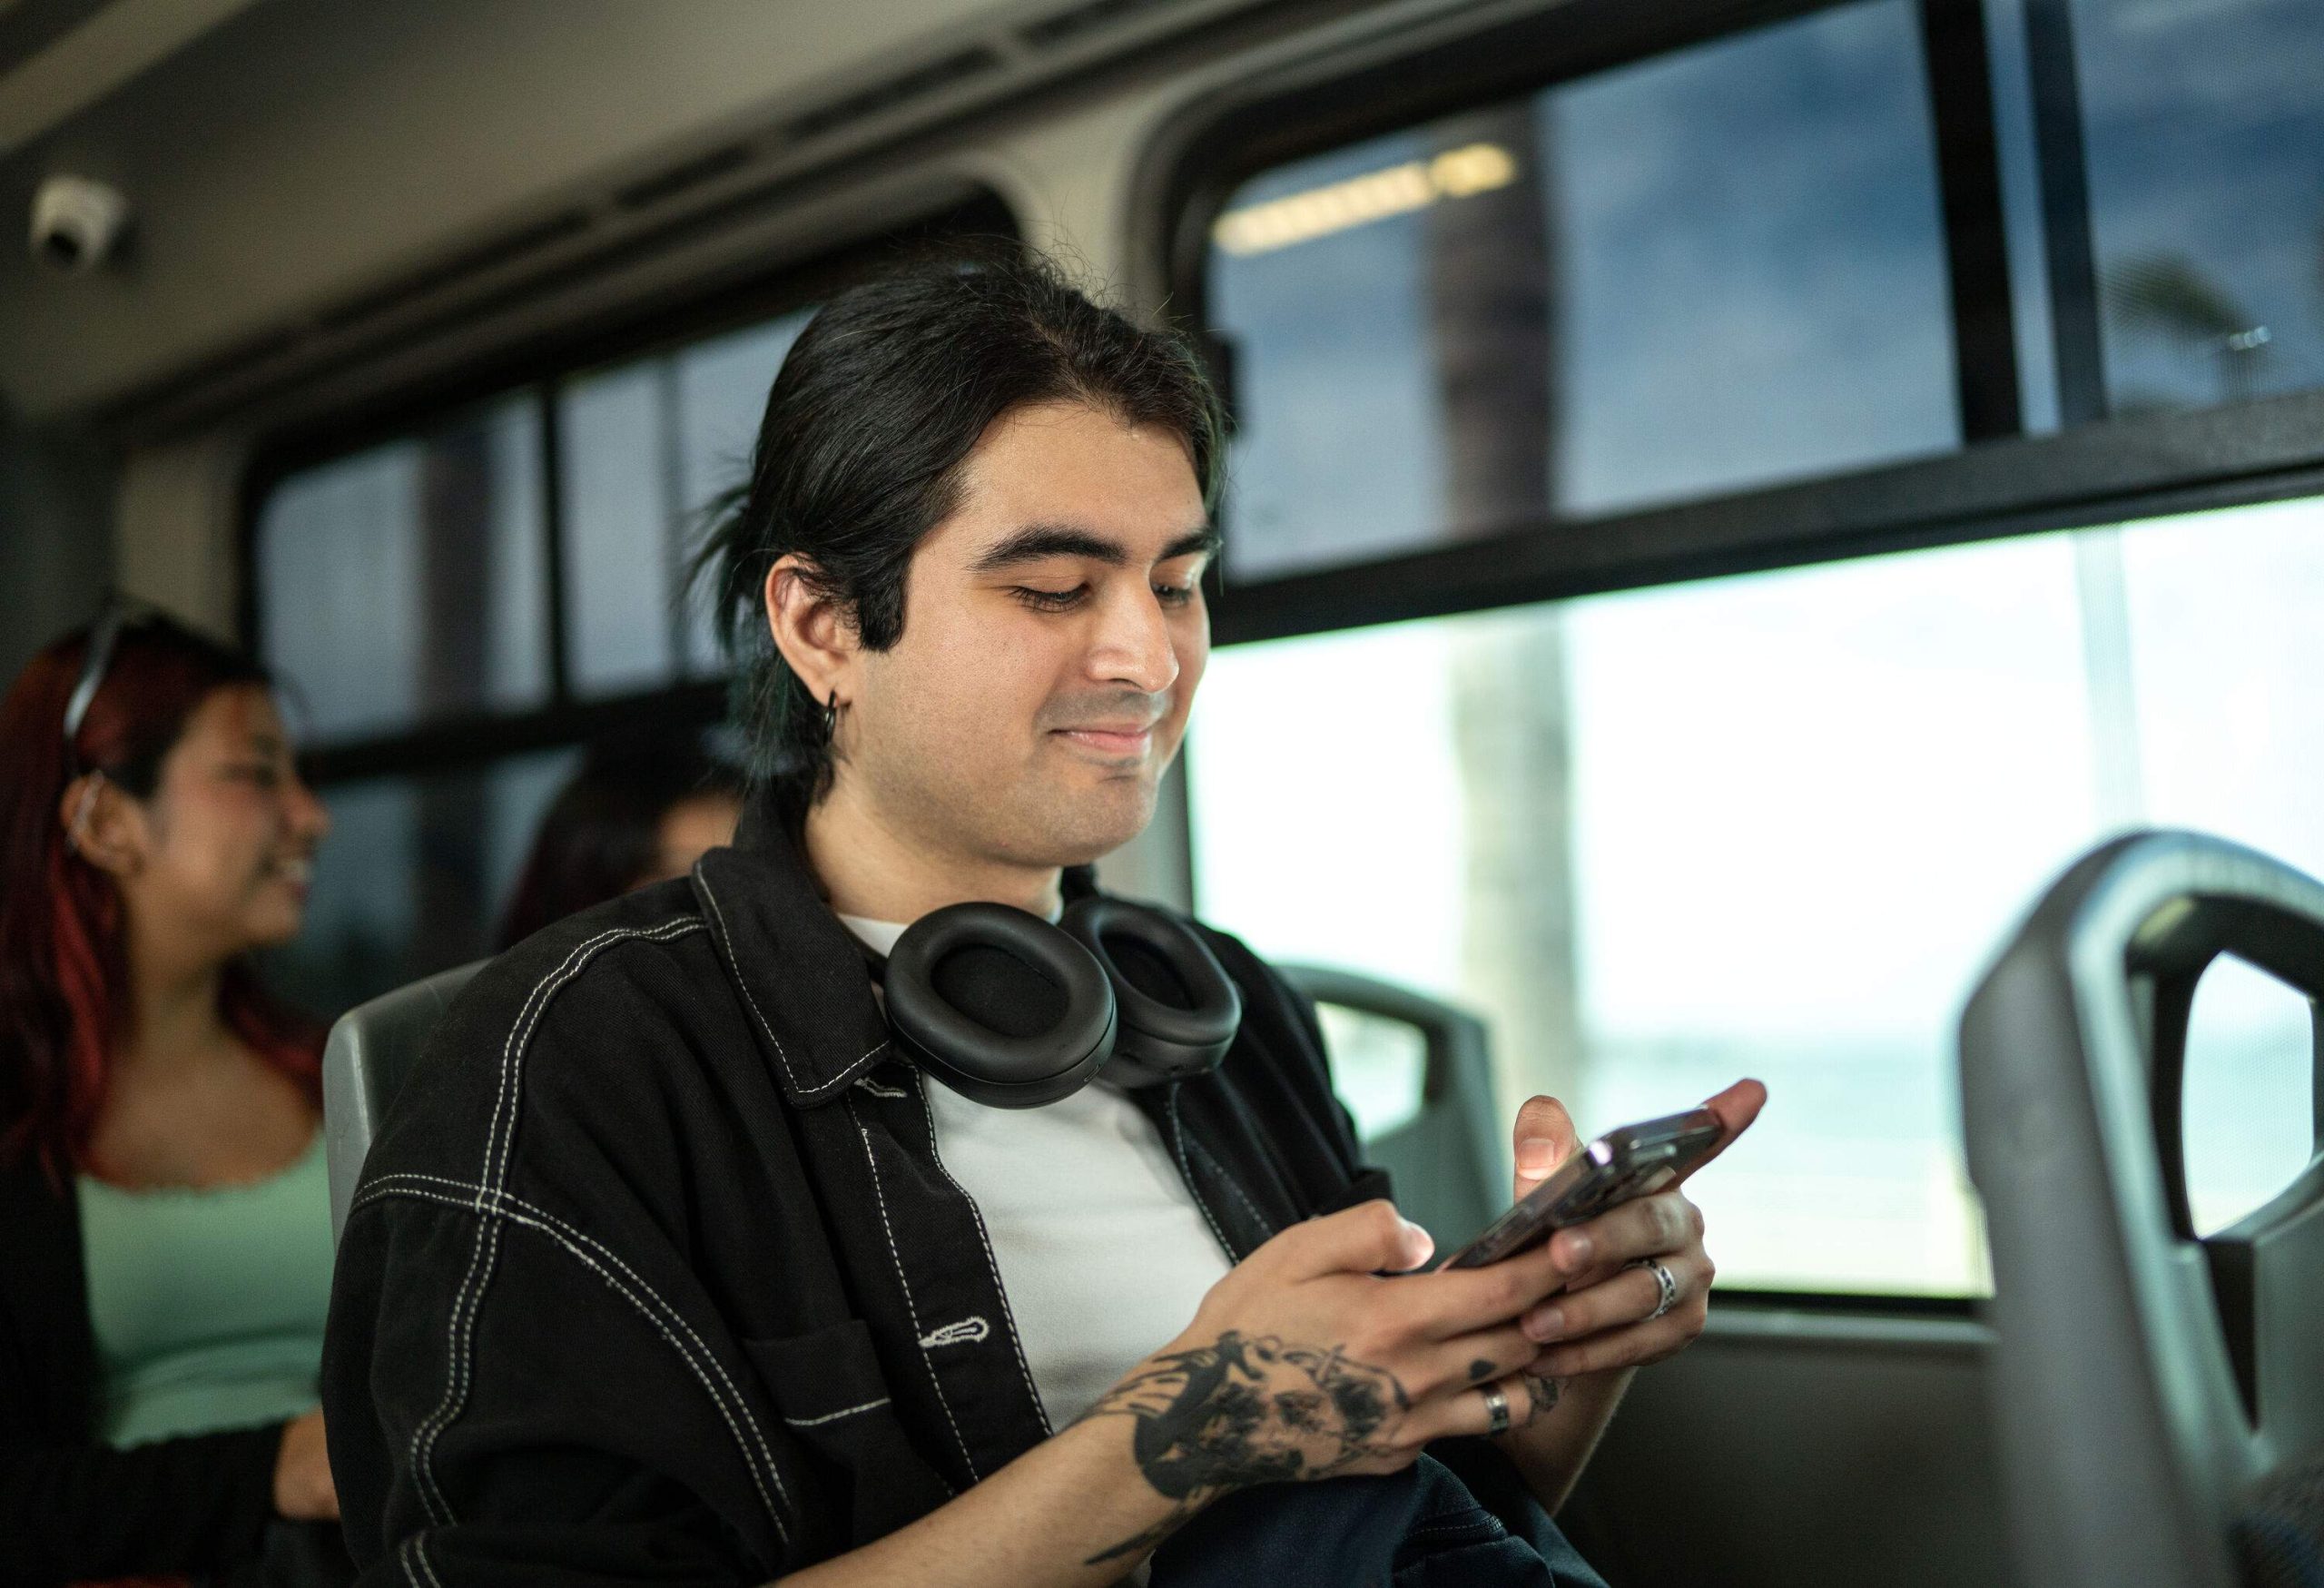 A young man on a bus wearing headphones around his neck and totally absorbed in his smartphone.